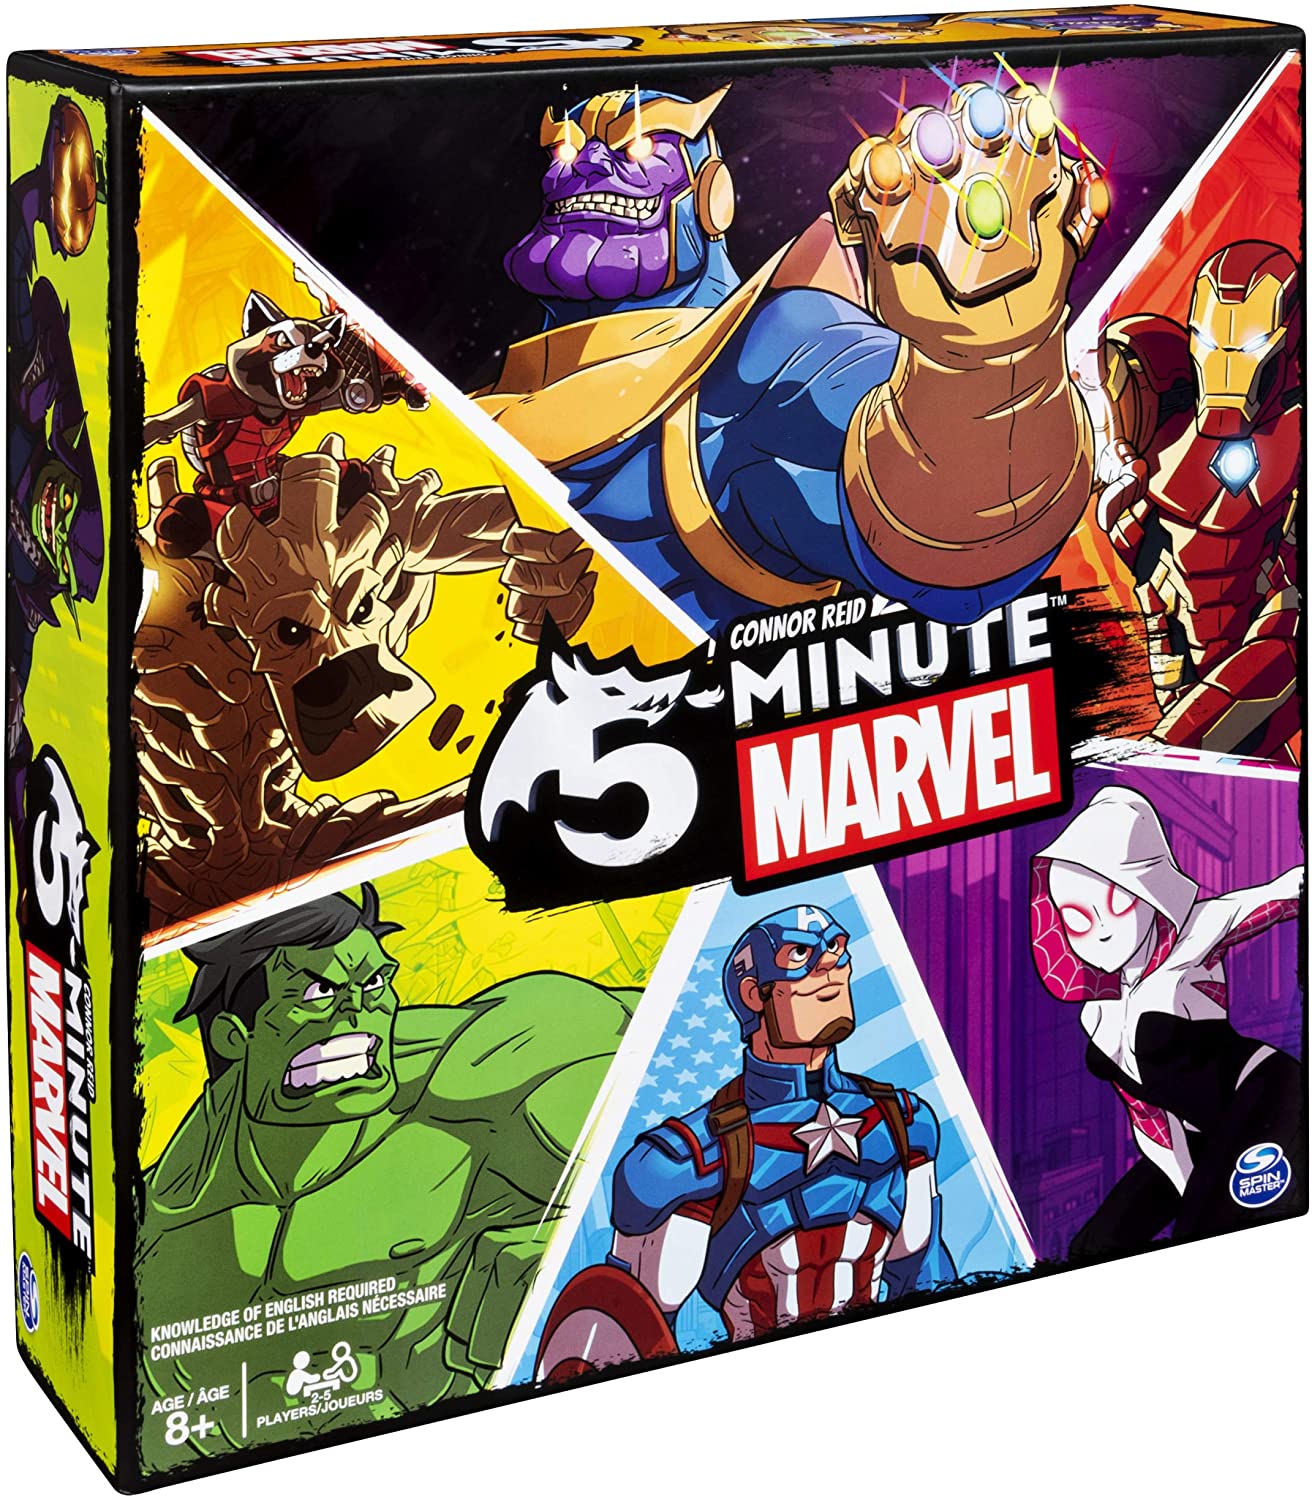 A Marvel Board Game where players work together to defeat Thanos in 5 minutes or less